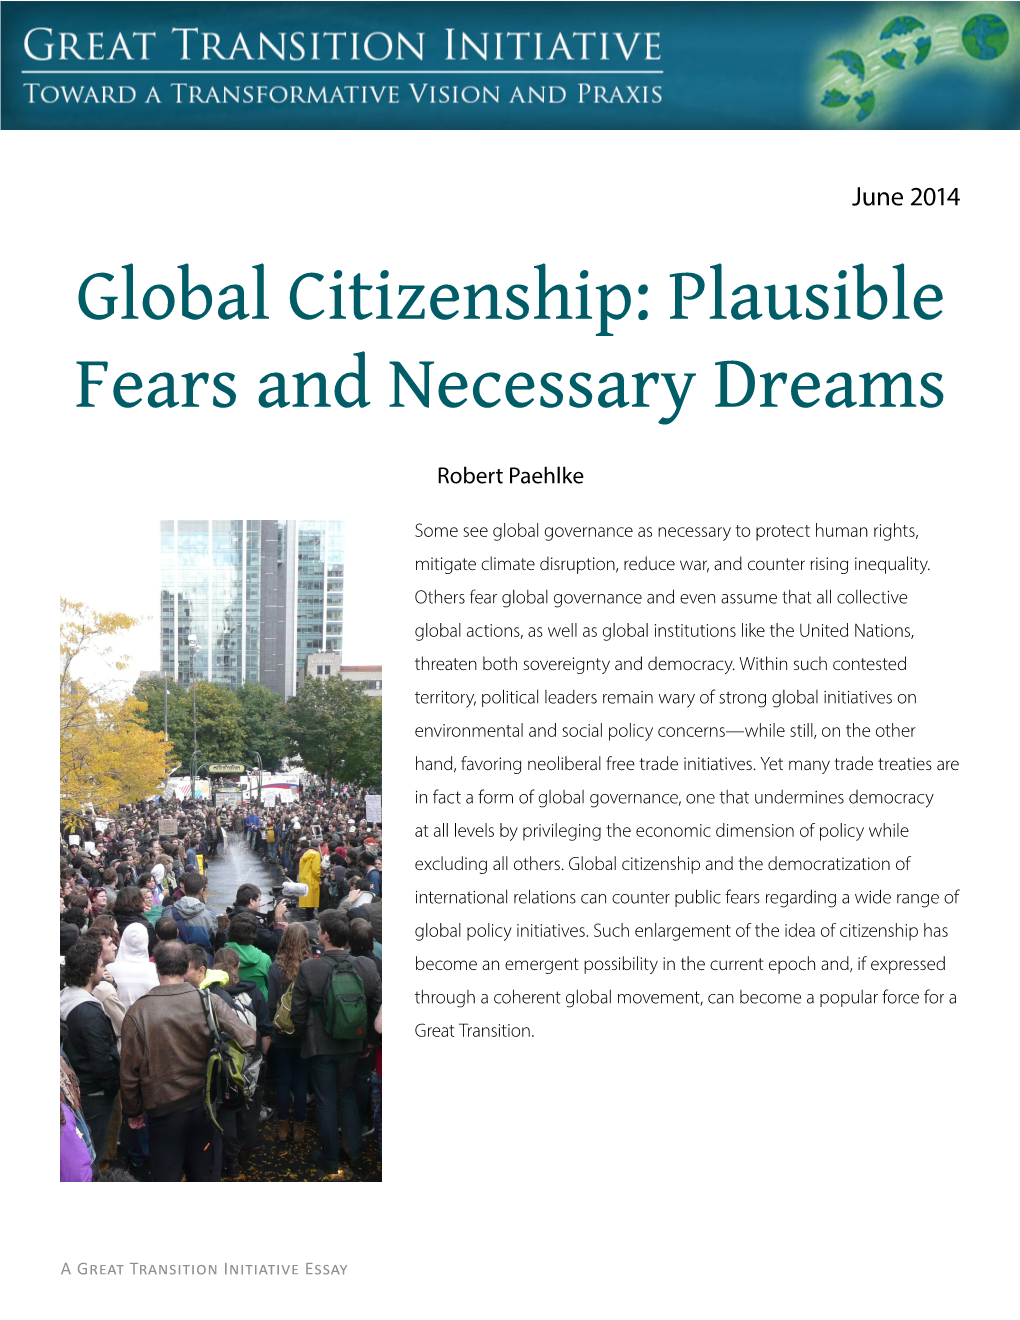 Global Citizenship: Plausible Fears and Necessary Dreams